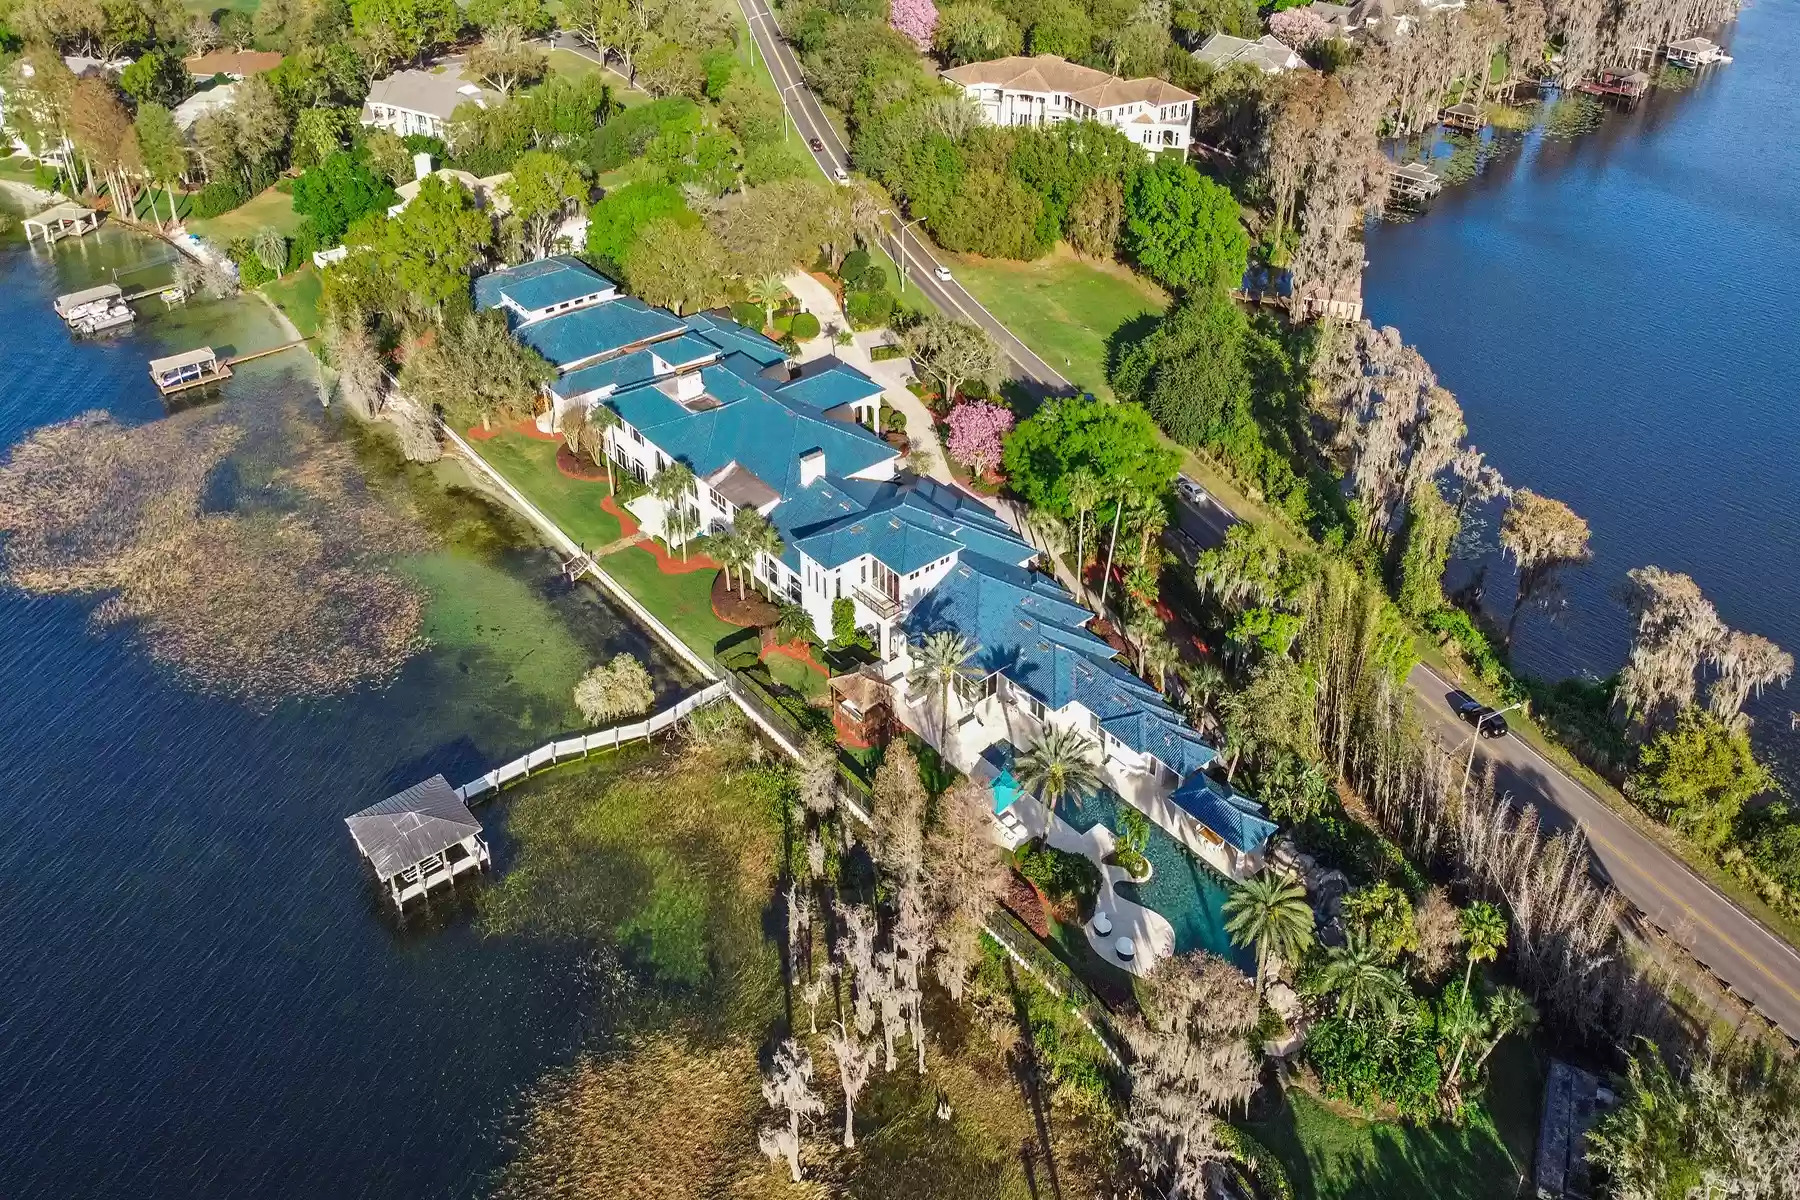 Shaquille O'Neal's home in Florida 